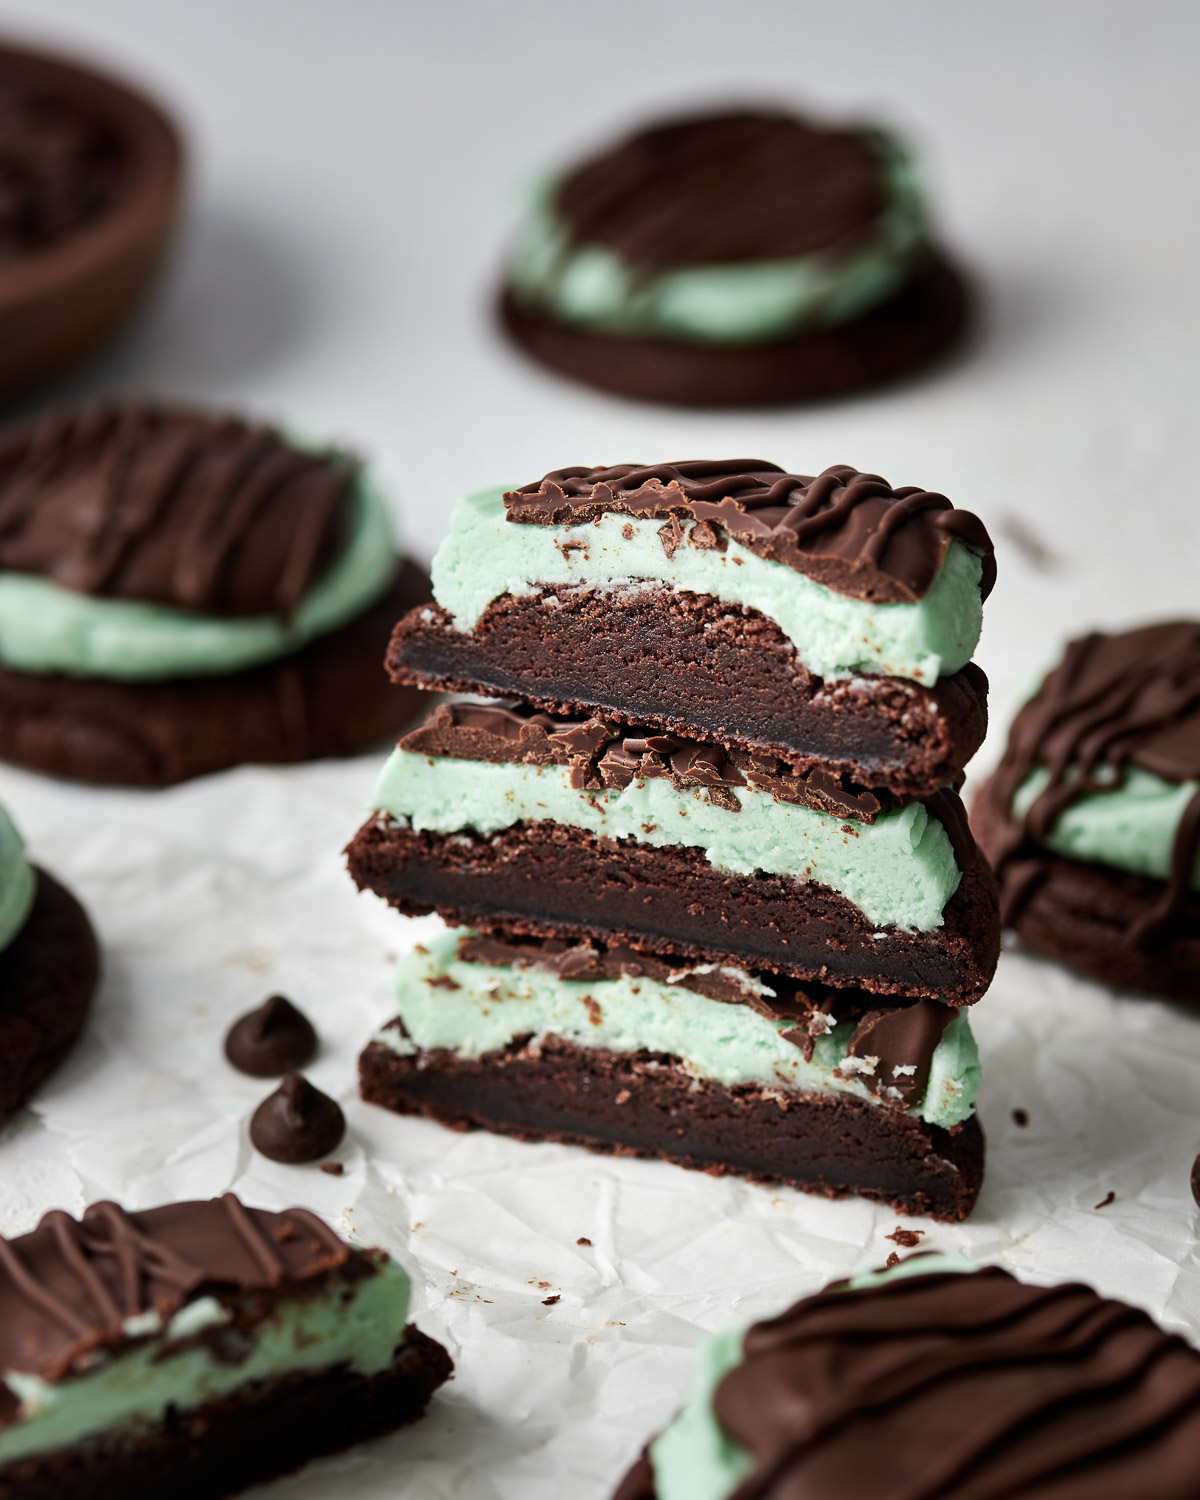 halved chocolate mint cookies stacked up with chocolate chips beside.